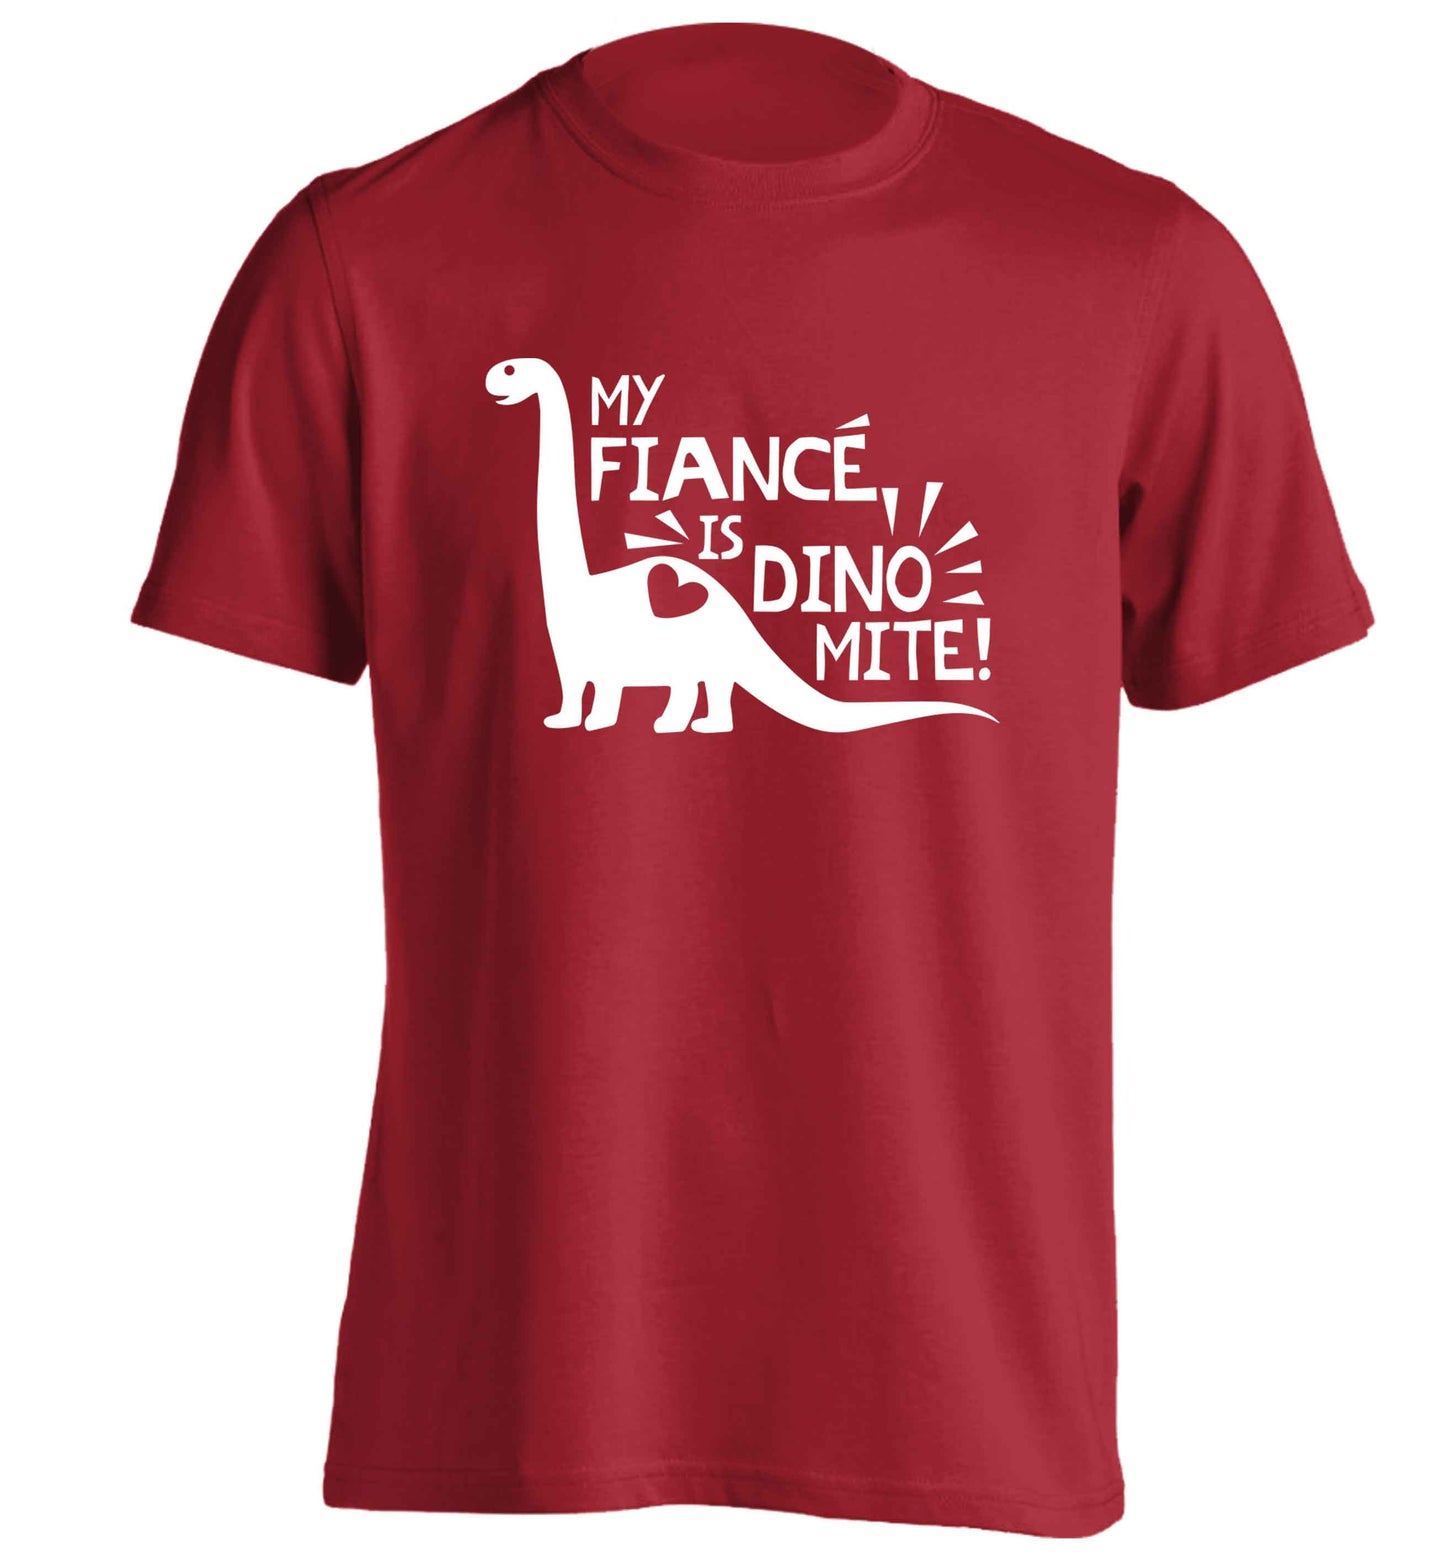 My fiance is dinomite! adults unisex red Tshirt 2XL